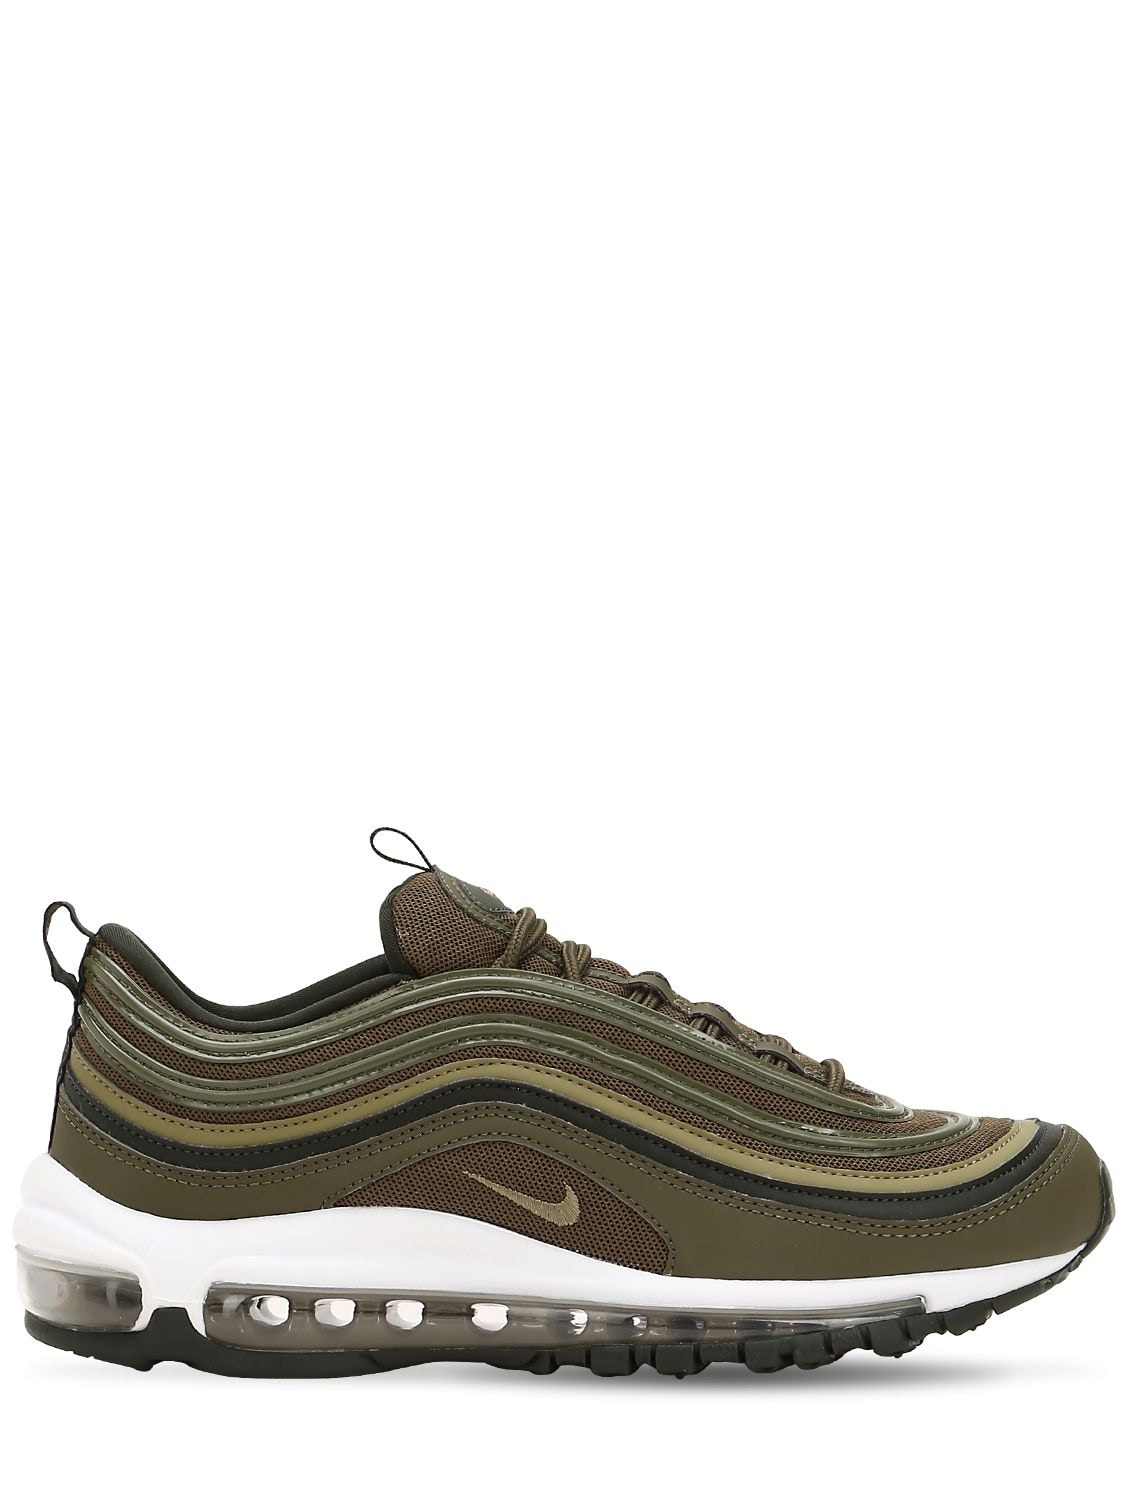 Nike Air Max 97 All Star Game 921826 404 Buy Online